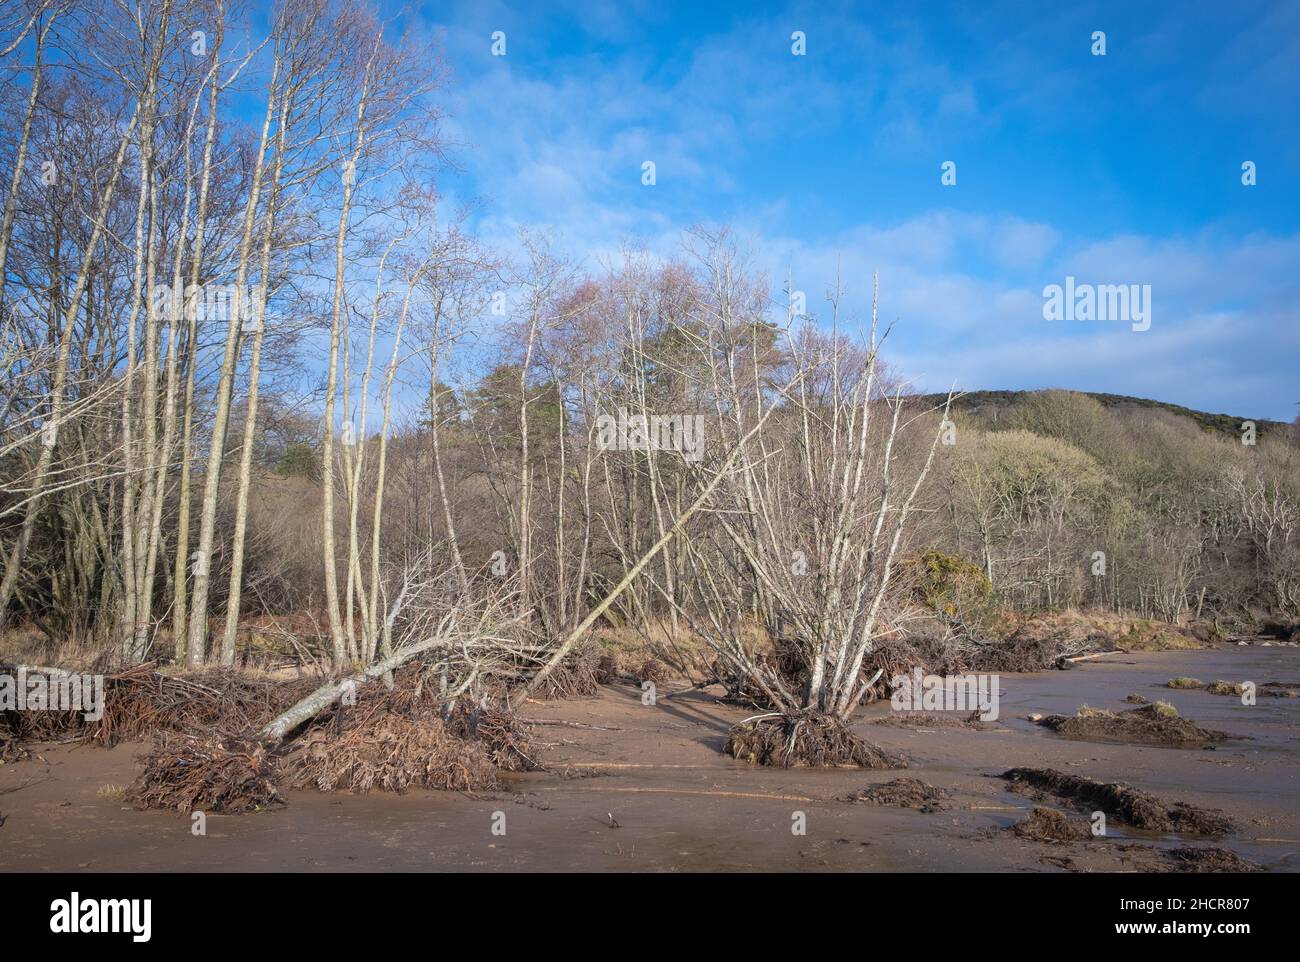 A row of trees show the impact of storm damage at Sandyhills beach, Dumfries and Galloway, Scotland. Stock Photo